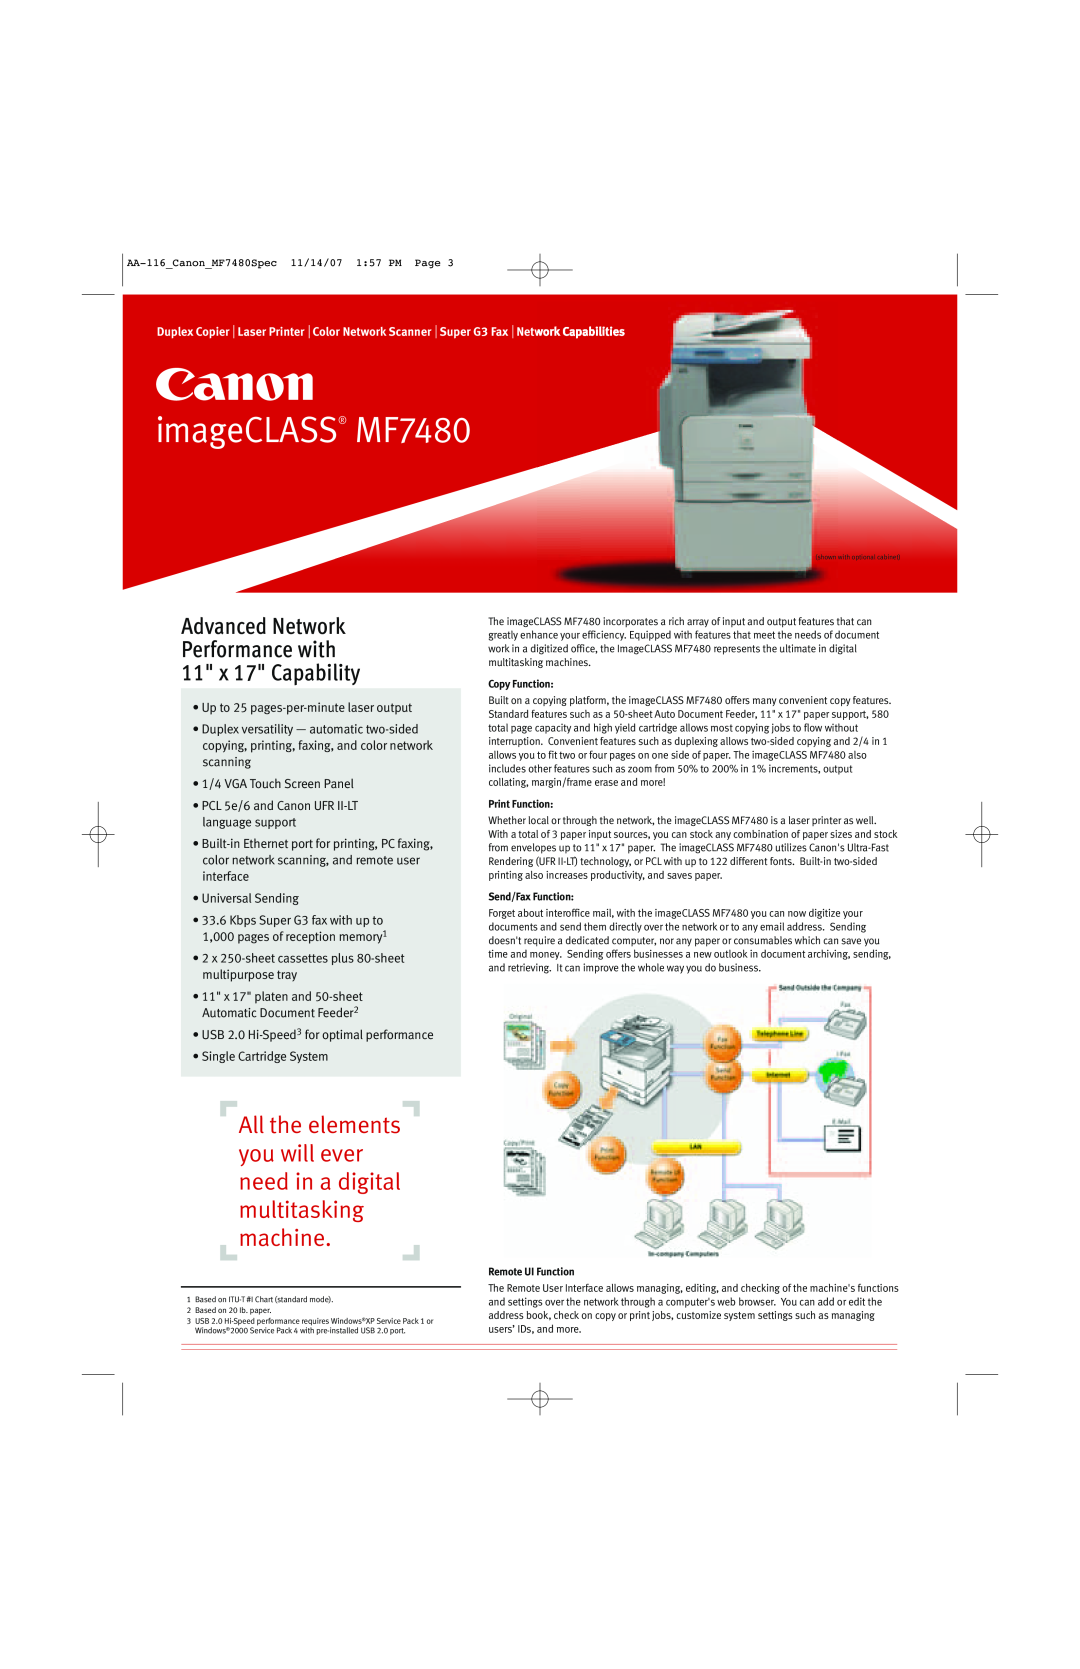 Canon manual imageCLASS MF7480, All the elements you will ever need in a digital multitasking machine, Copy Function 